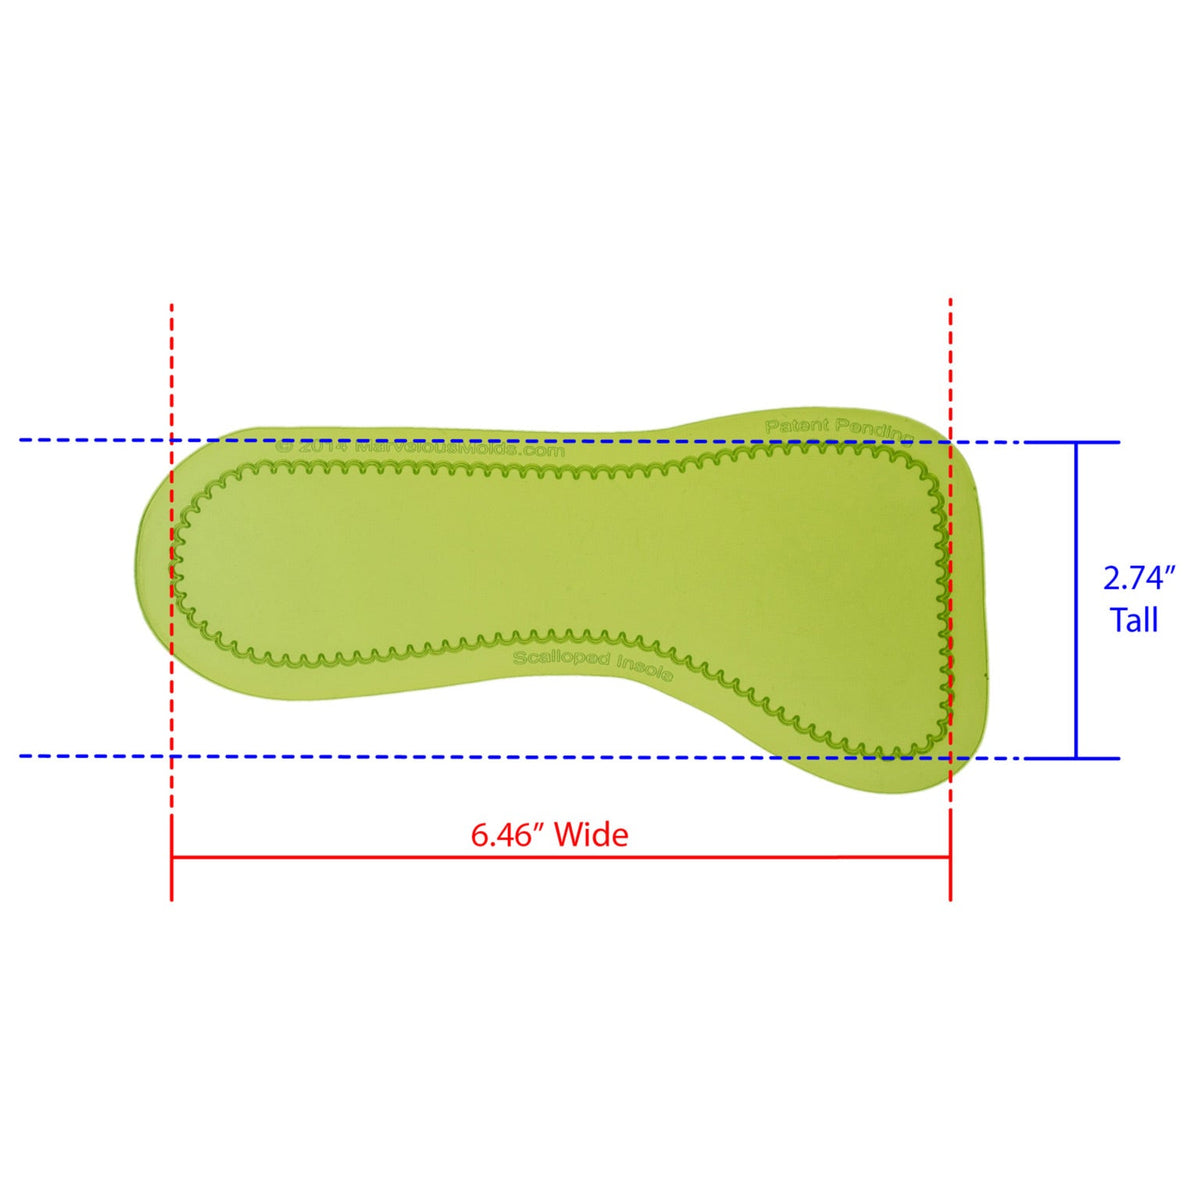 Scalloped Insole Silicone Onlay Cavity Measures 6.46 inches Wide by 2.74 inches Tall, proudly Made in USA